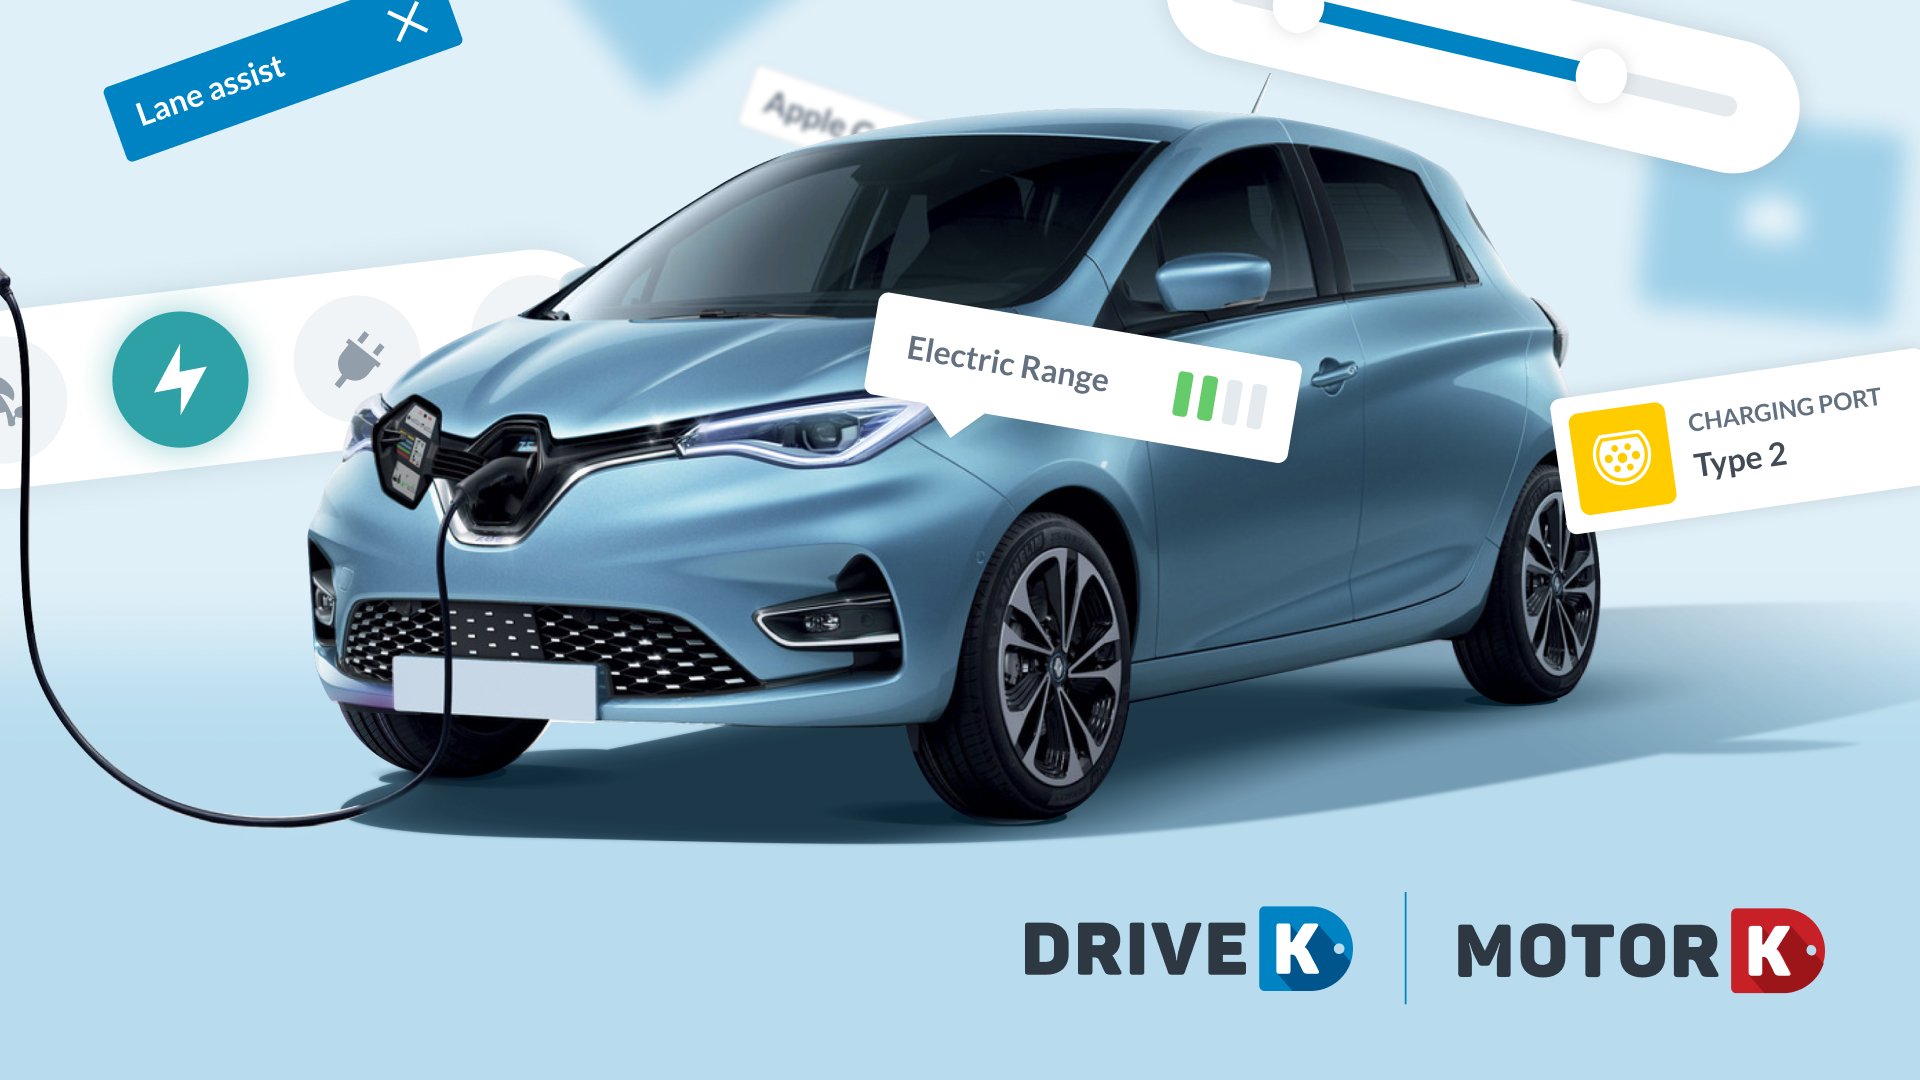 DriveK launches his electric and hybrid cars configurator